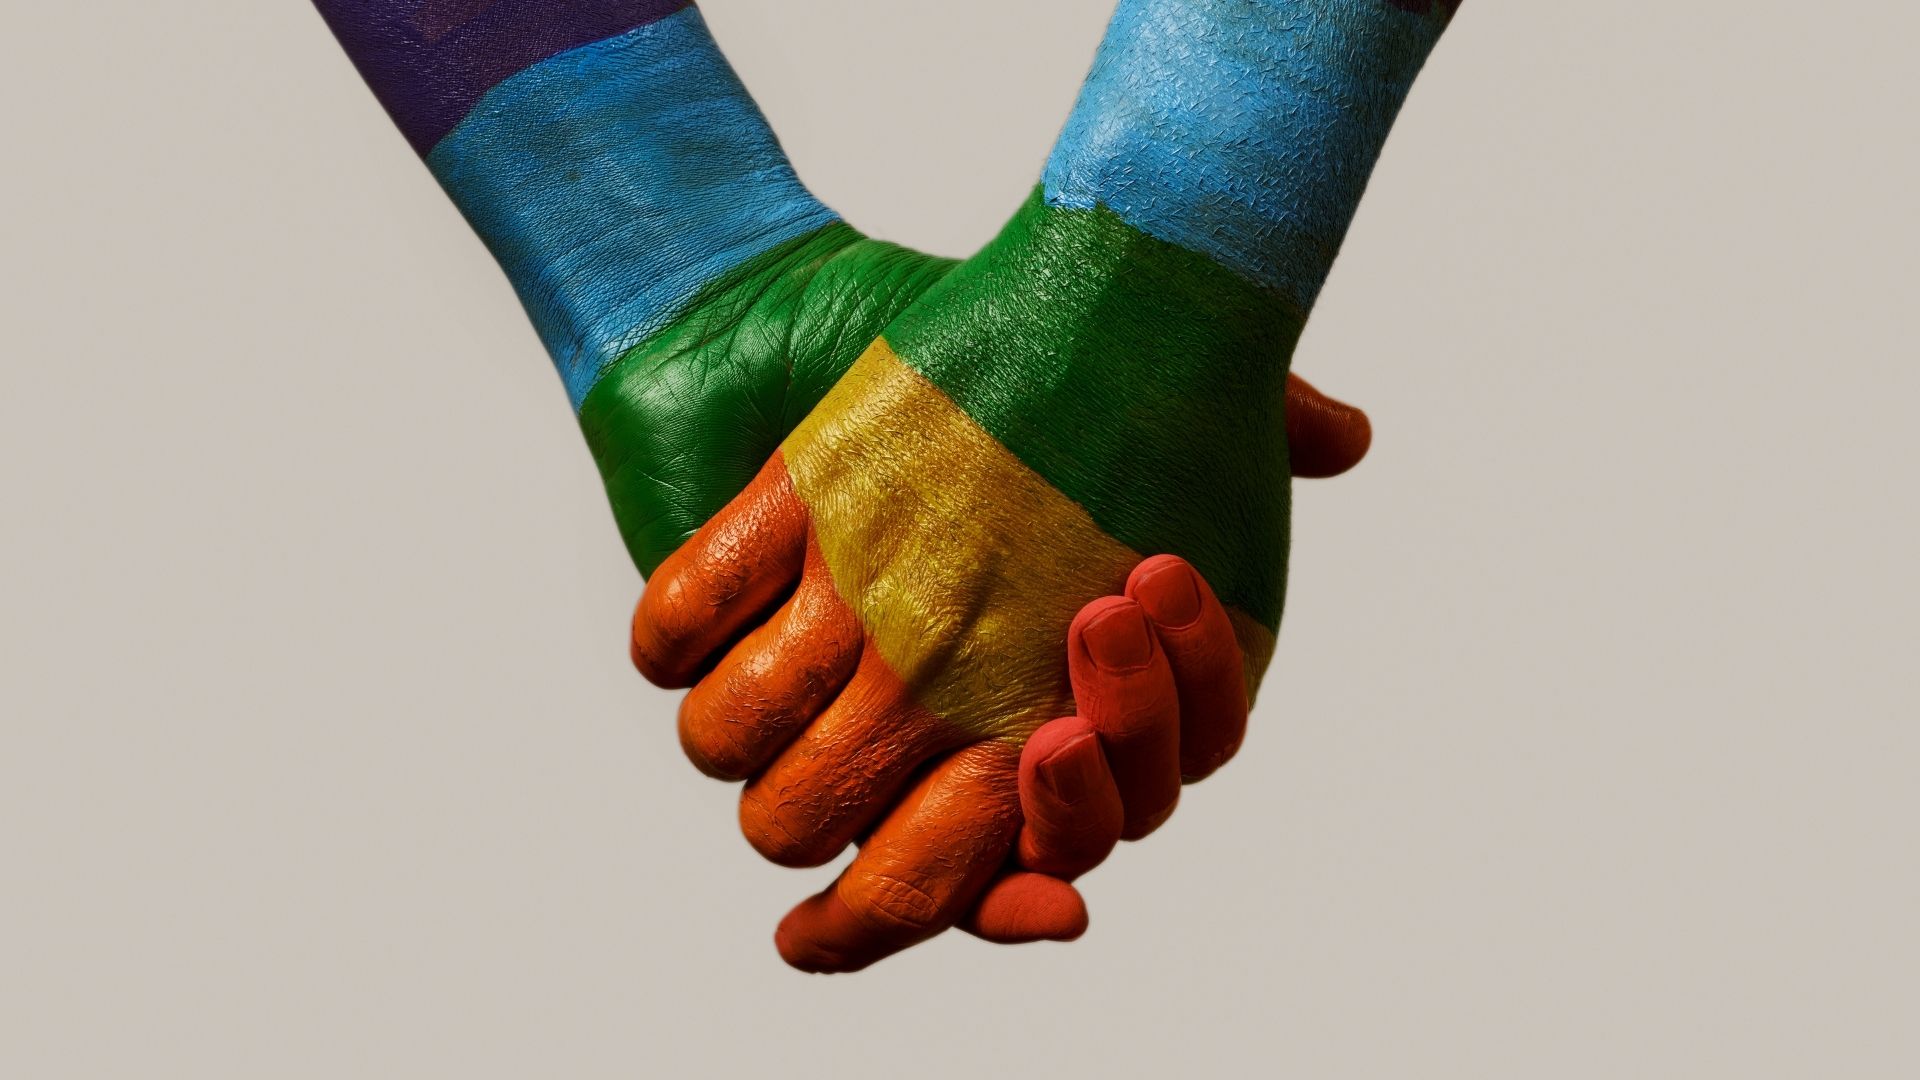 Seeking LGBTQ Counseling for Support on Coming Out and How to Do it